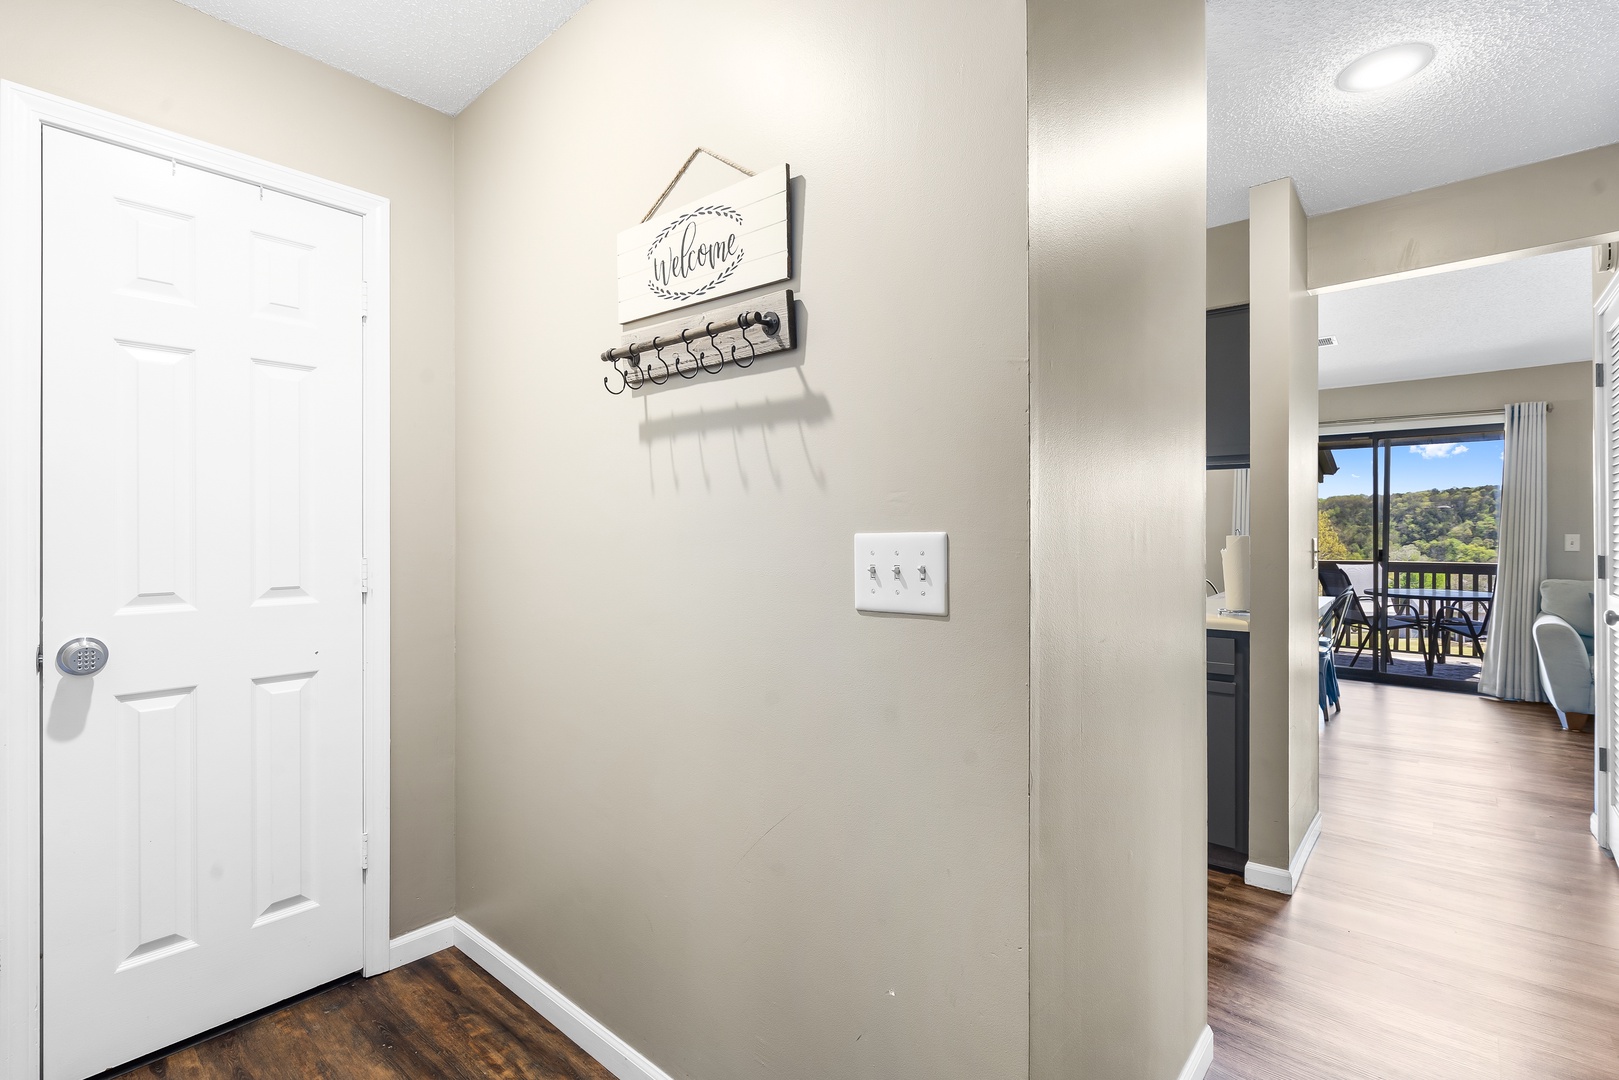 Unit 20’s entryway will have you feeling right at home